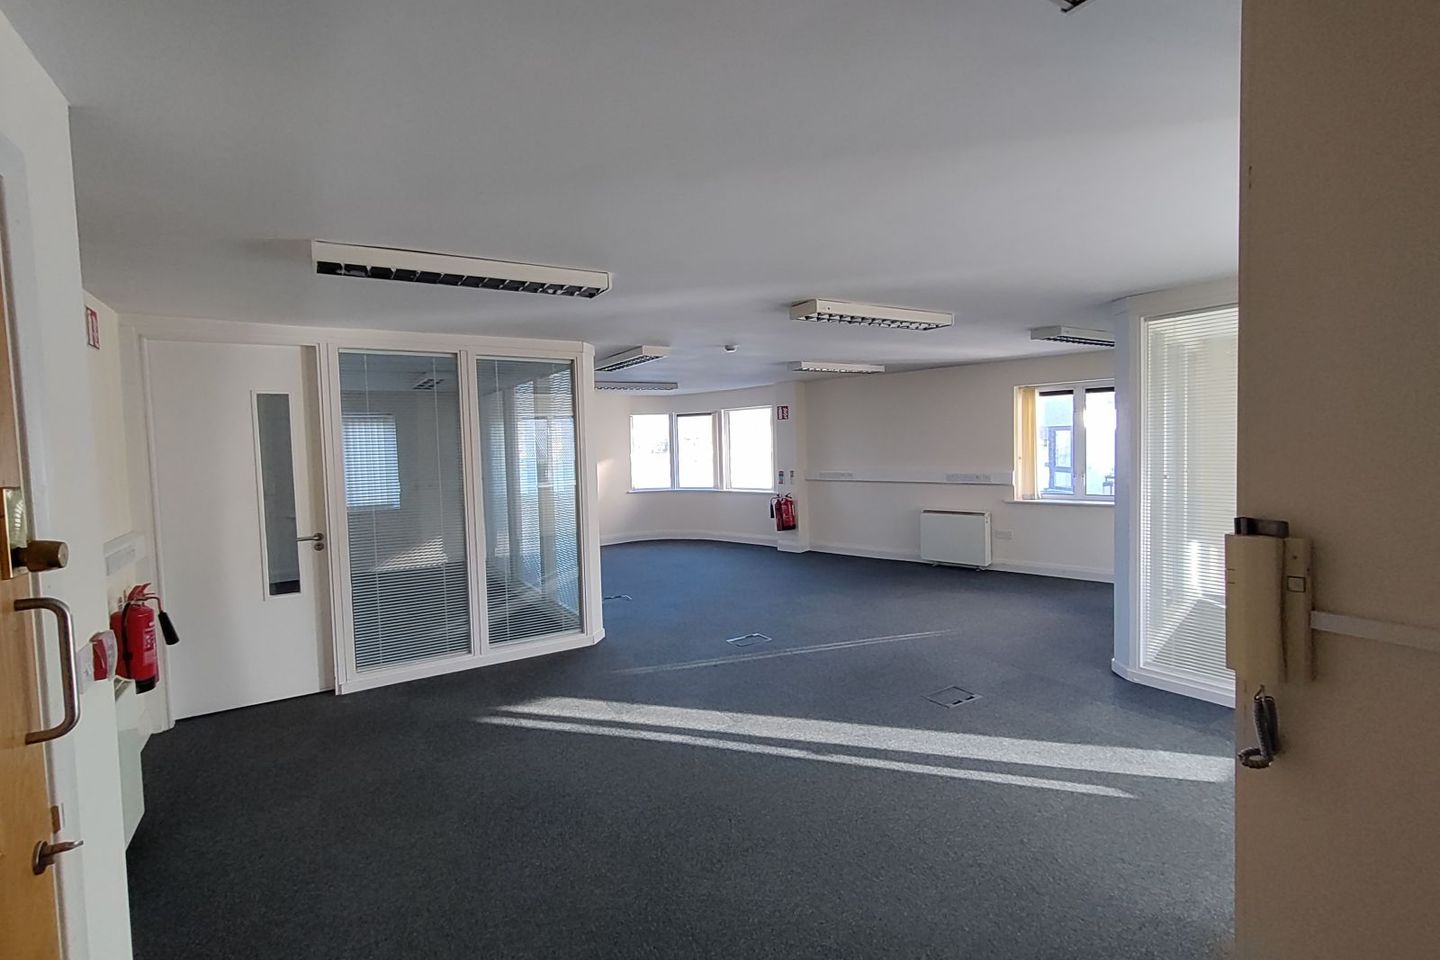 Unit 6, Second Floor, Priory Court, The Quay, New Ross. Y34HF10, New Ross, Co. Wexford